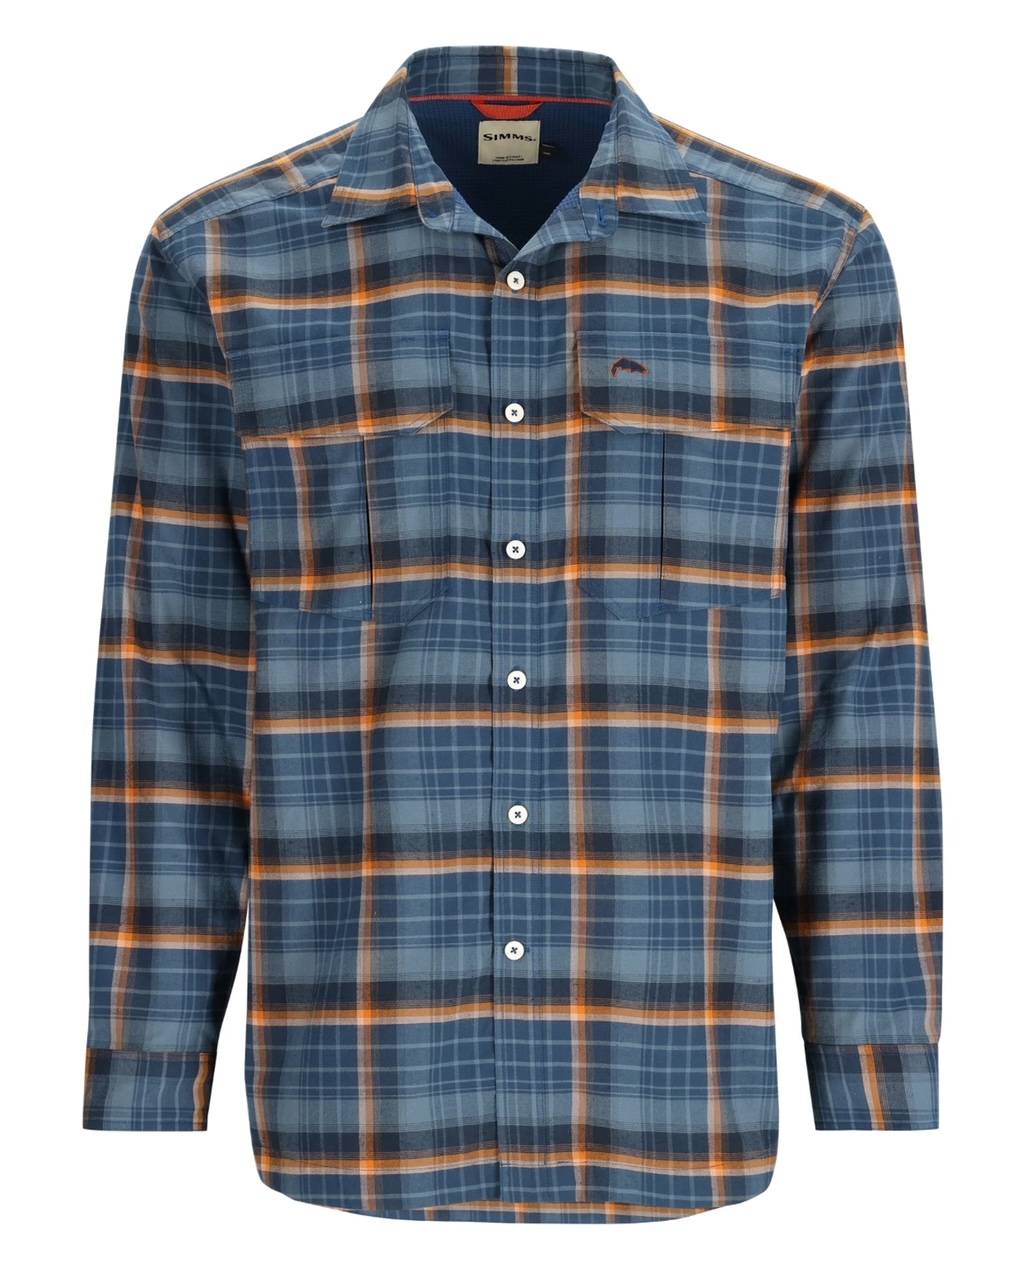 Simms M's Coldweather LS Shirt - Neptune/Sun Glow Ombre Plaid - Small